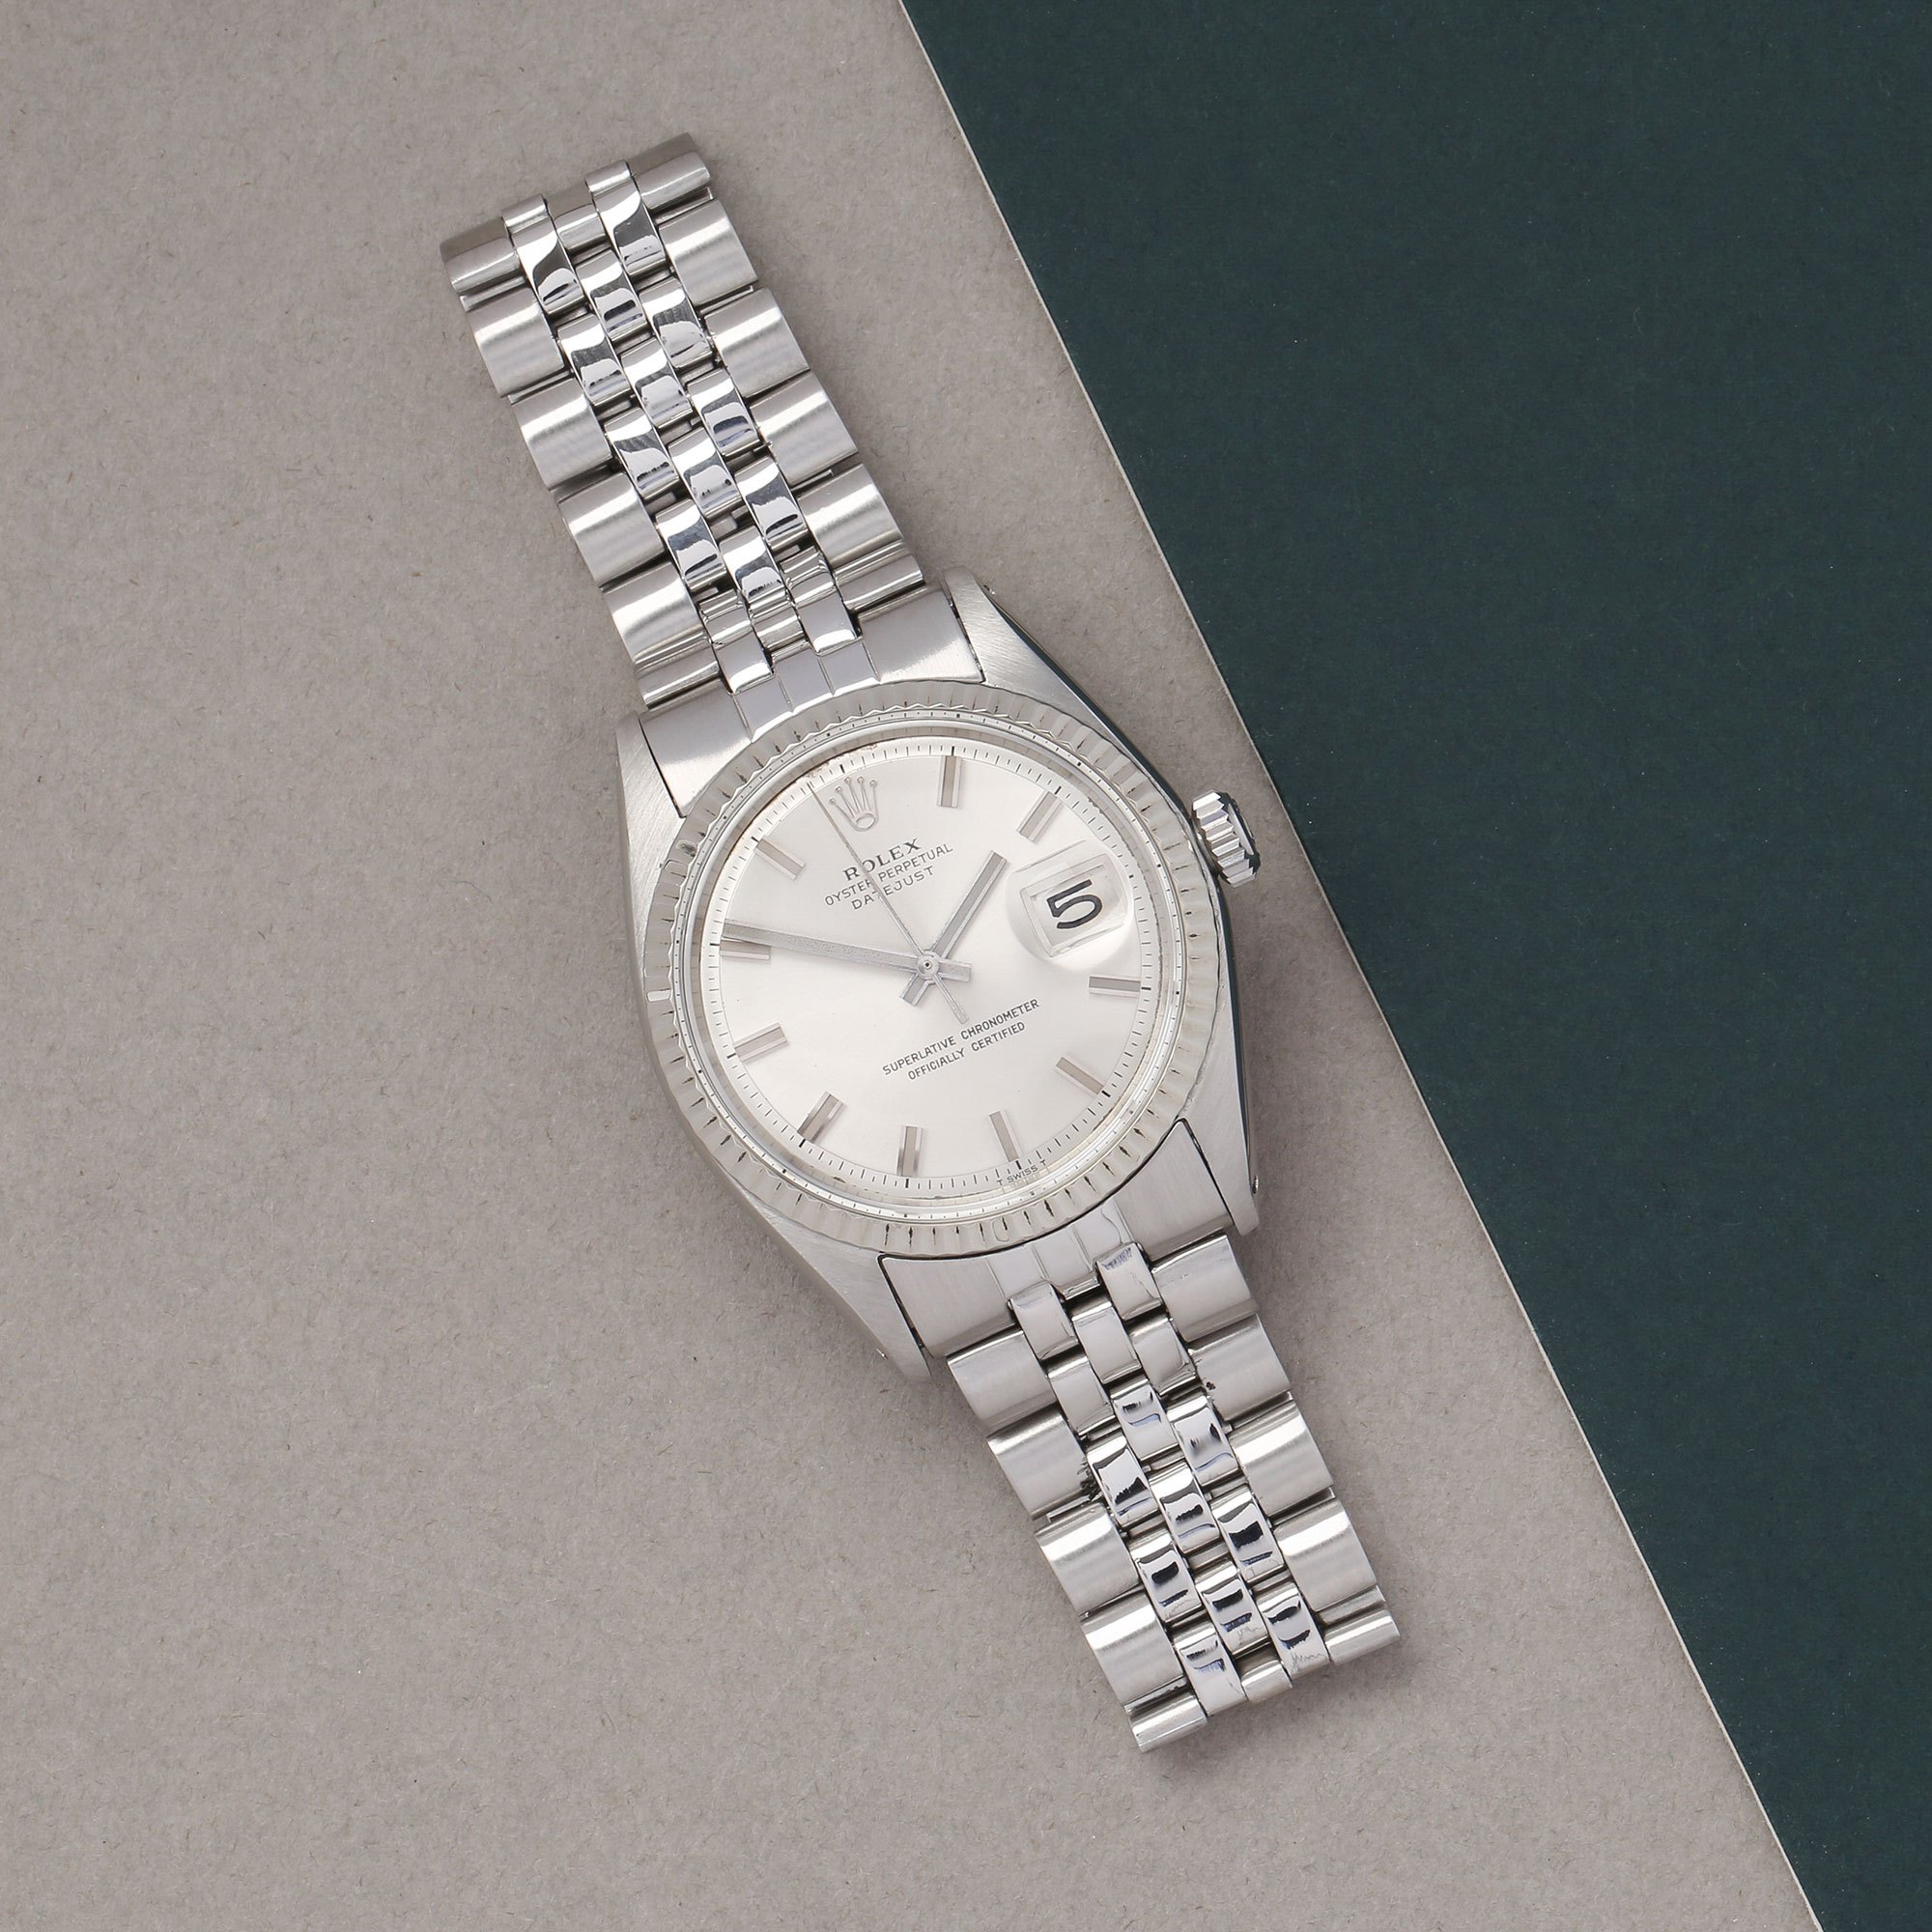 Rolex Datejust 36 'Wideboy' Dial Stainless Steel 1601